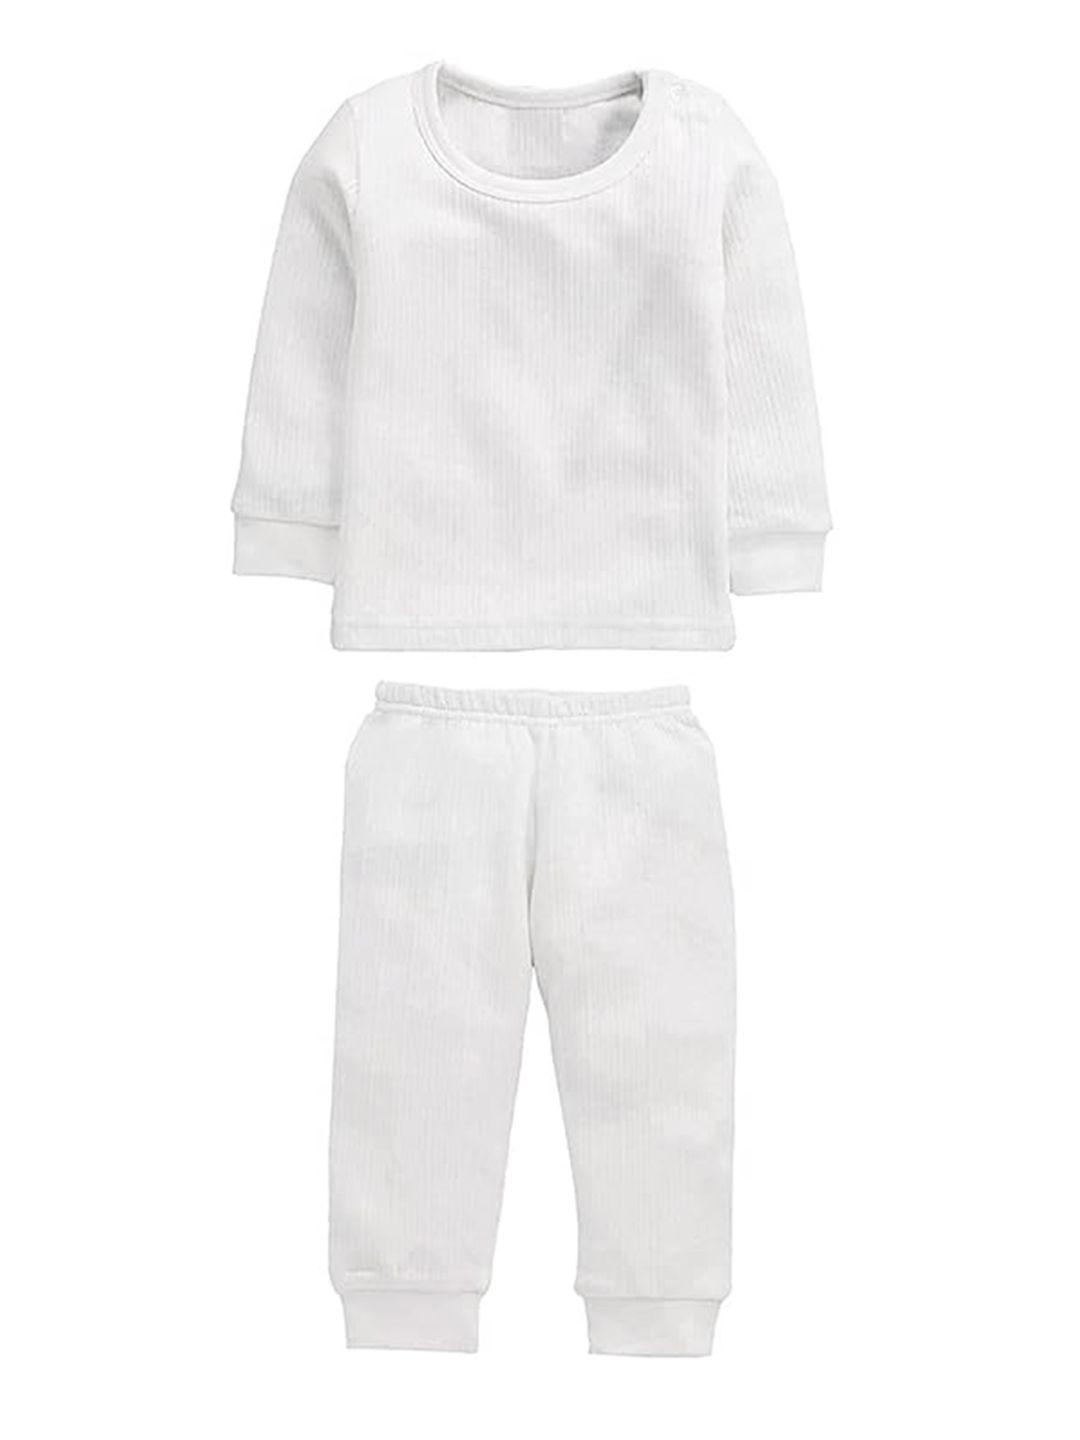 baesd-infant-boys-pure-cotton-thermal-set